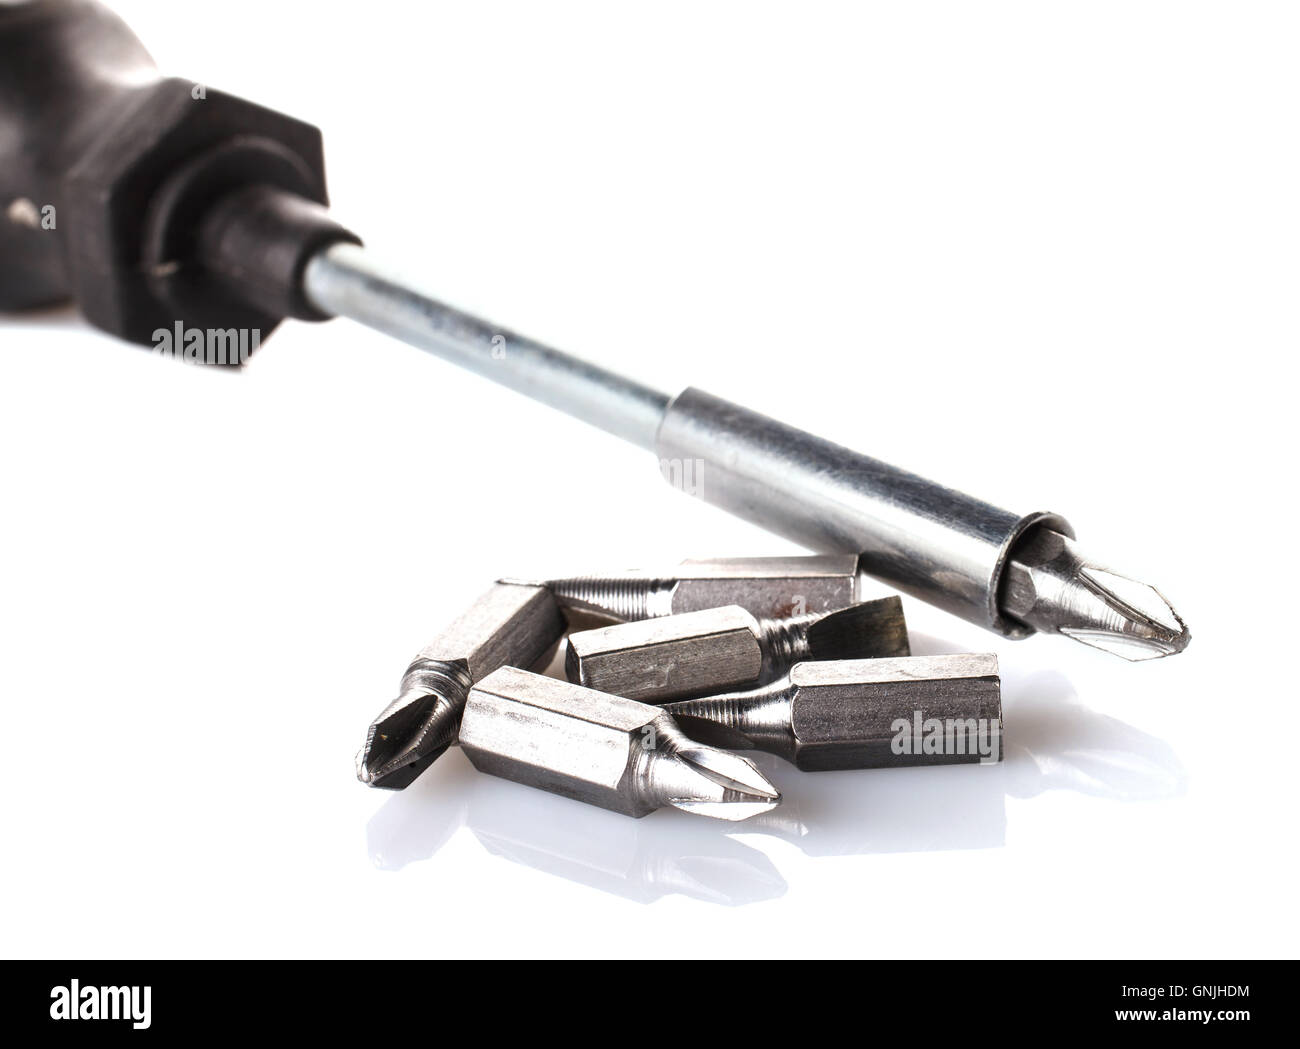 screwdrive and replaceable bits Stock Photo